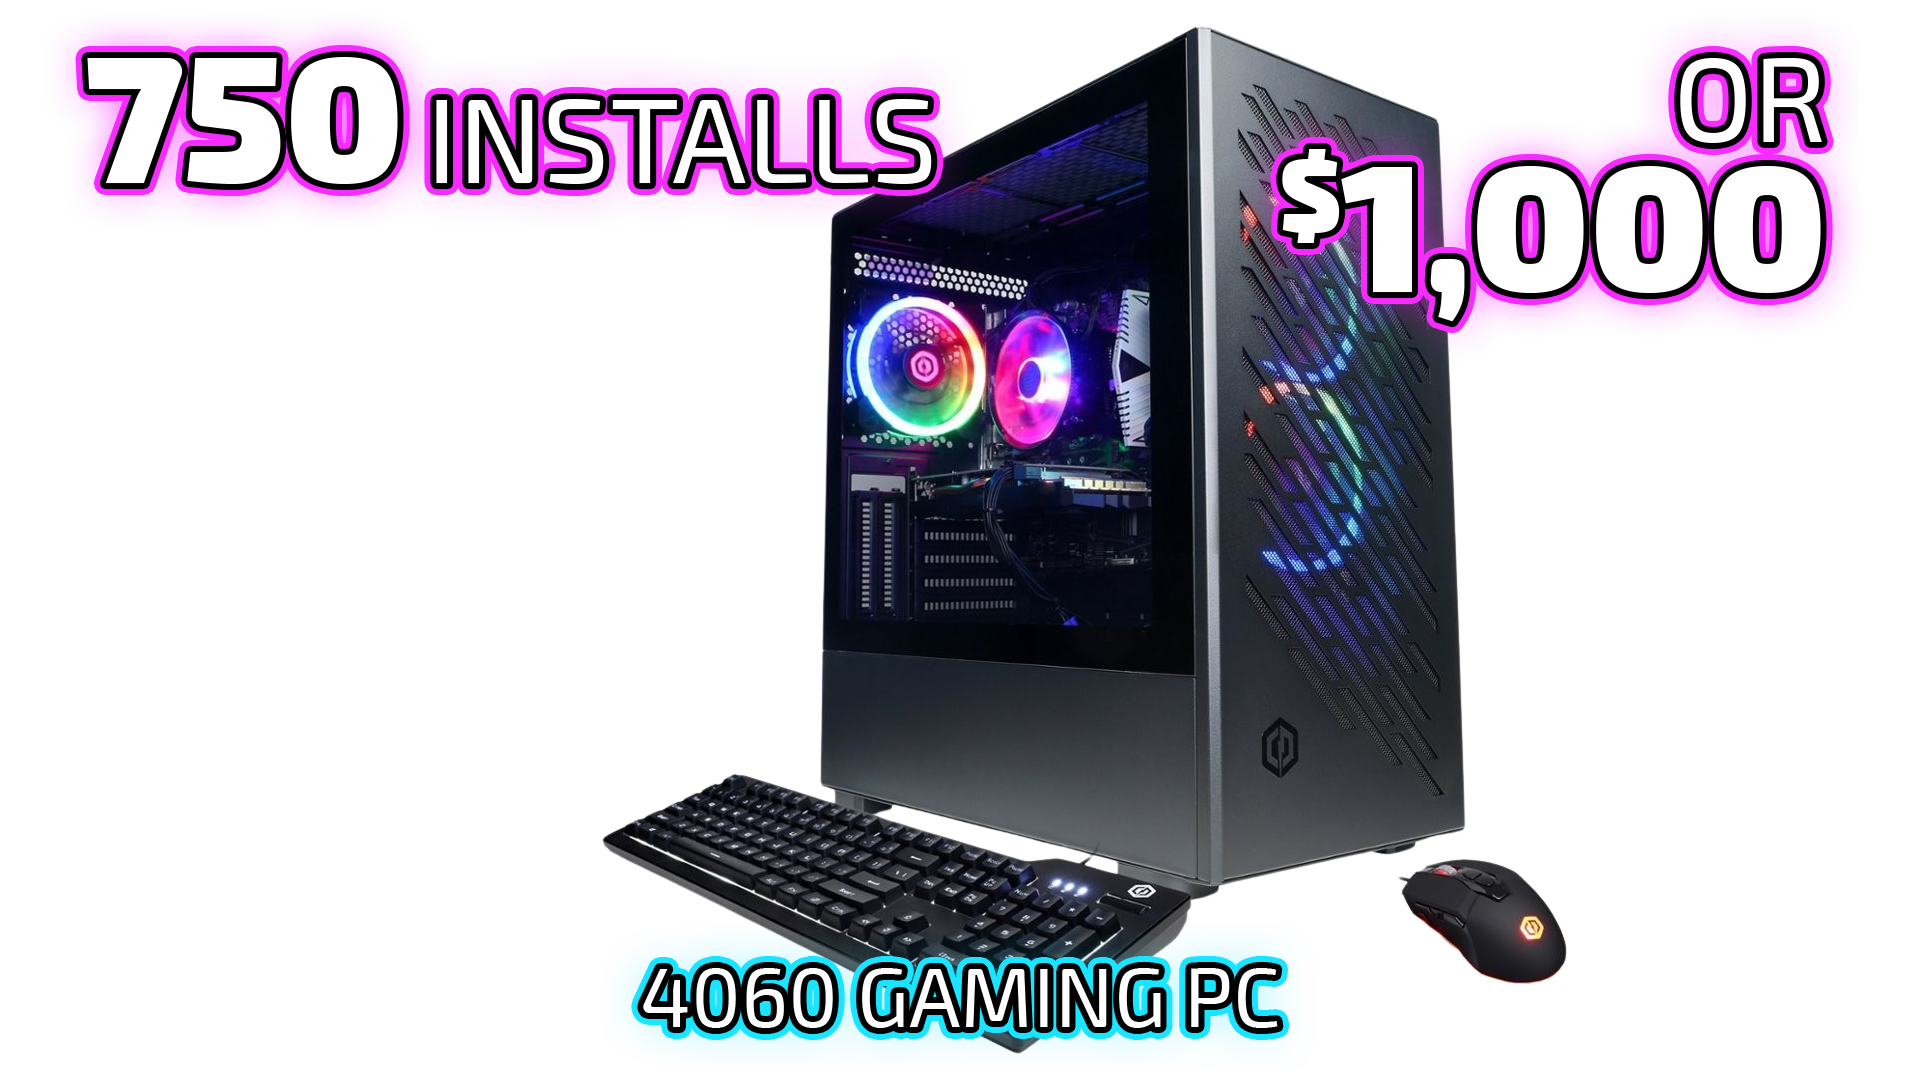 🚨GAMING PC #GIVEAWAY! 🚨 Enter for a chance to win a FREE Gaming PC!  Sponsored by @beteran.hq and built by @brparadox & @regimentgg…